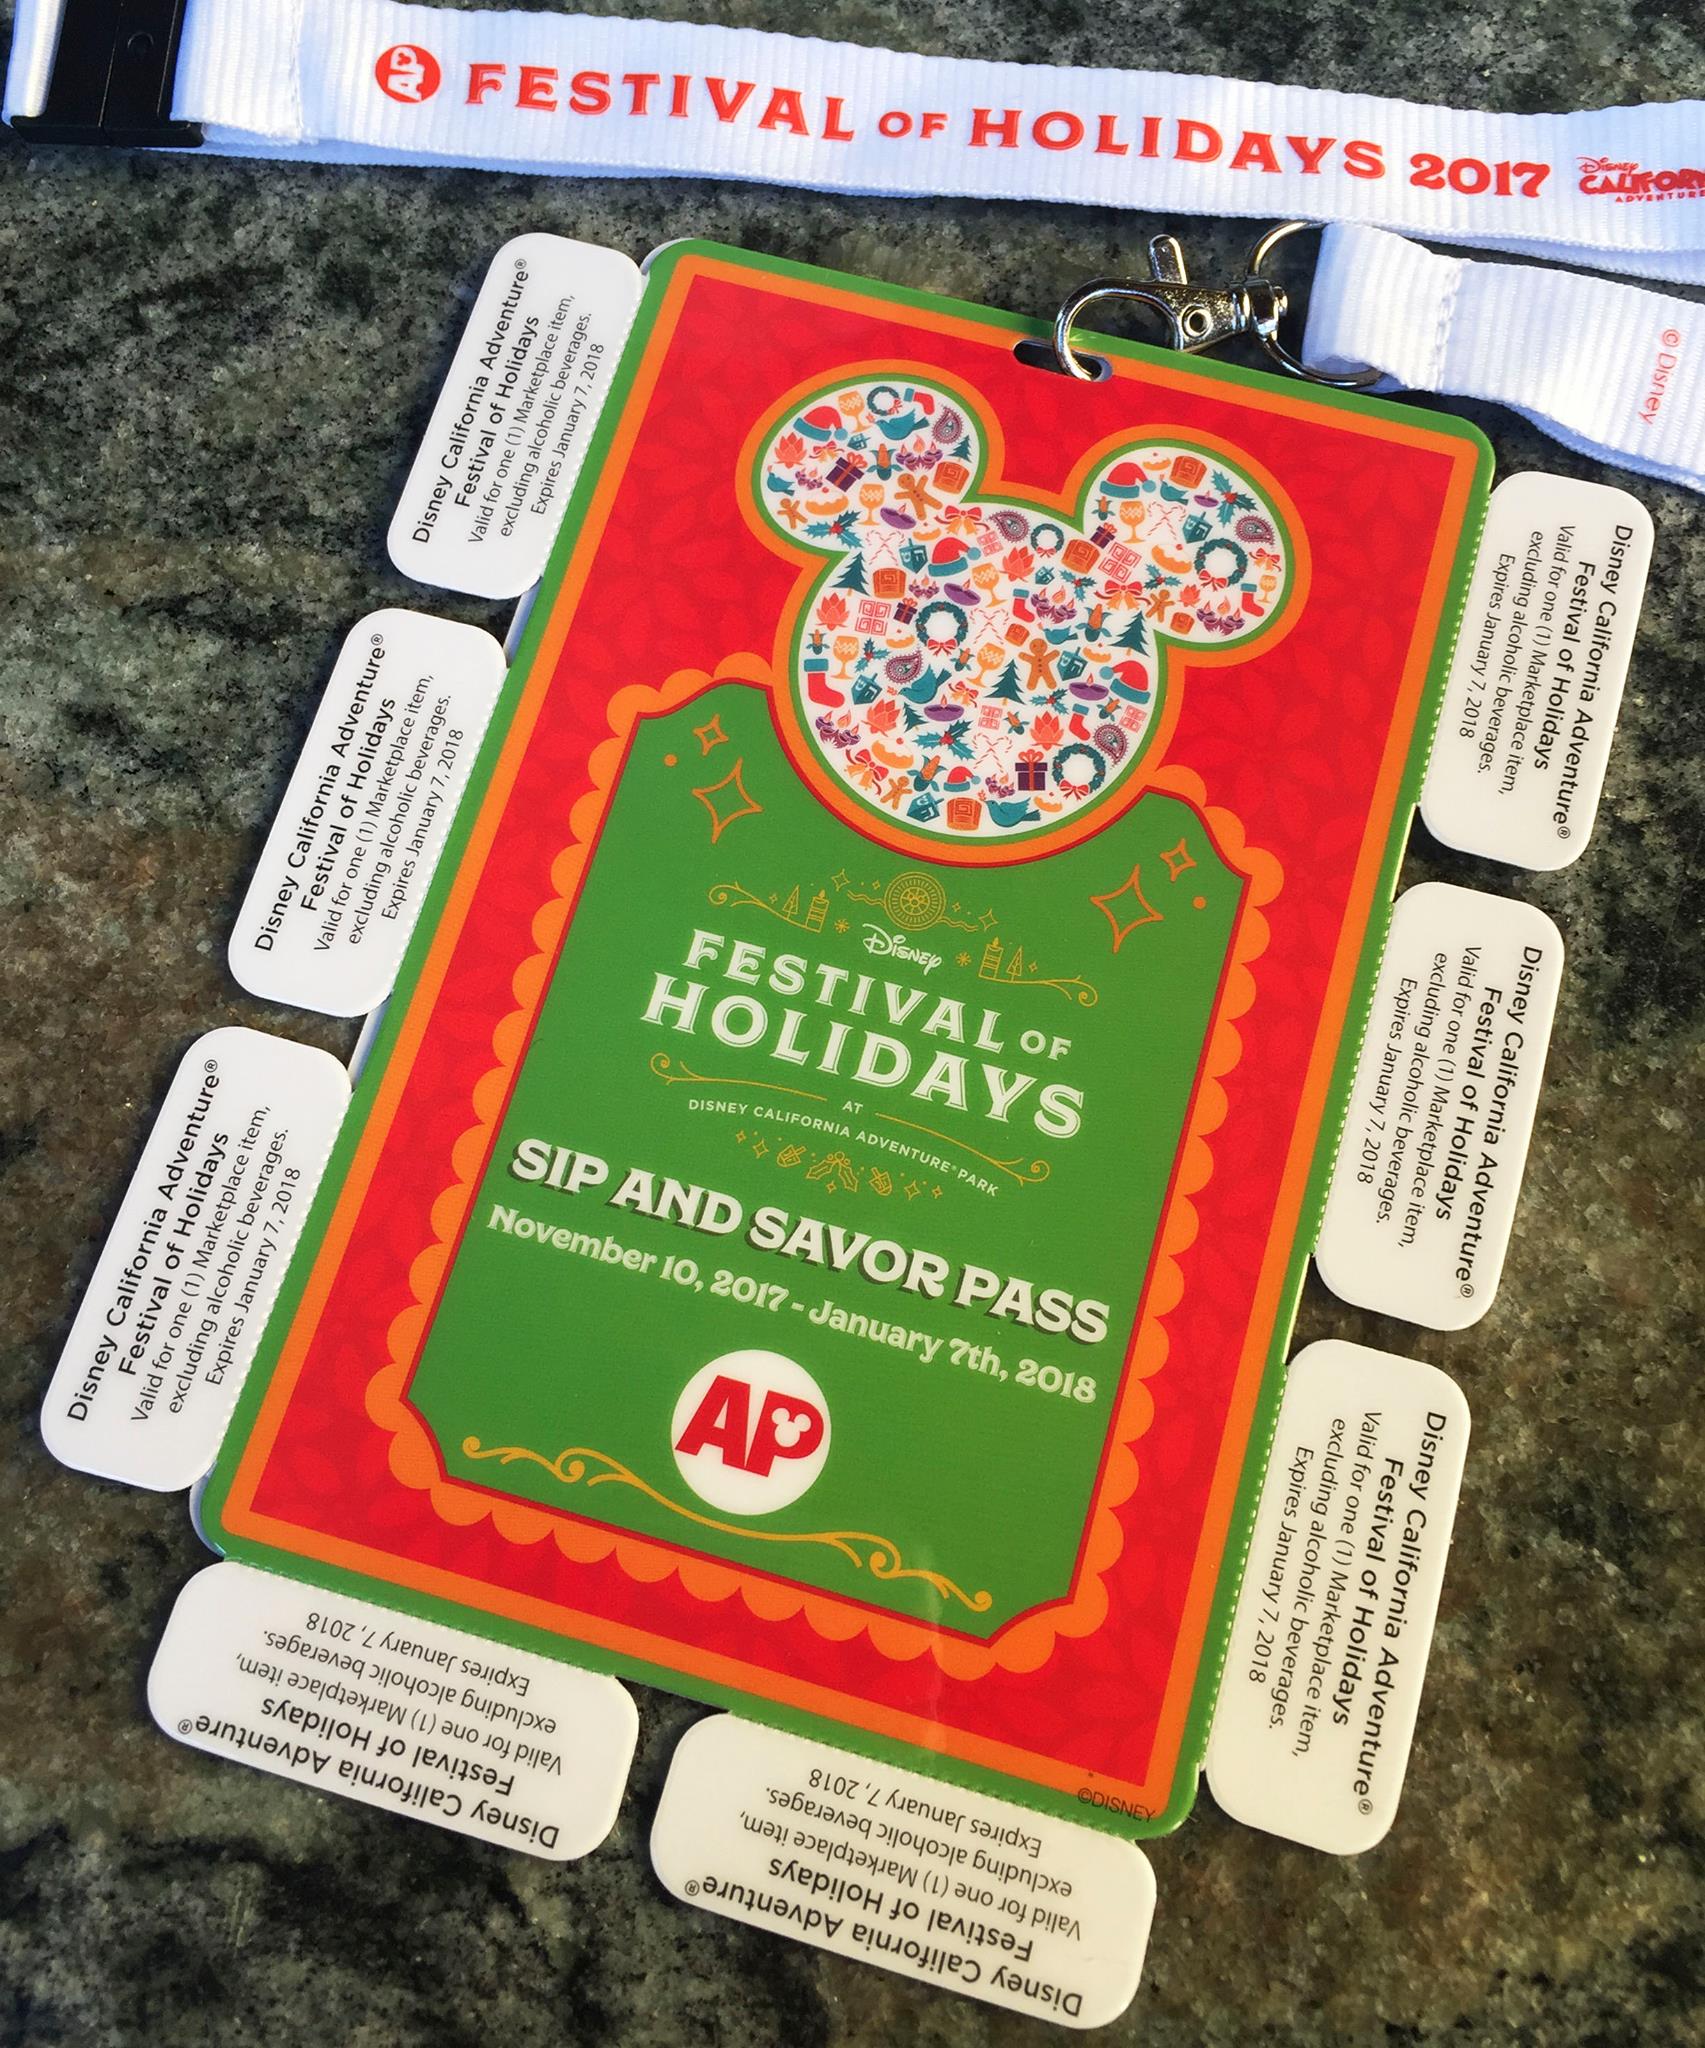 Annual Passholder Sip and Savor Pass Returns For Festival of Holidays 2017